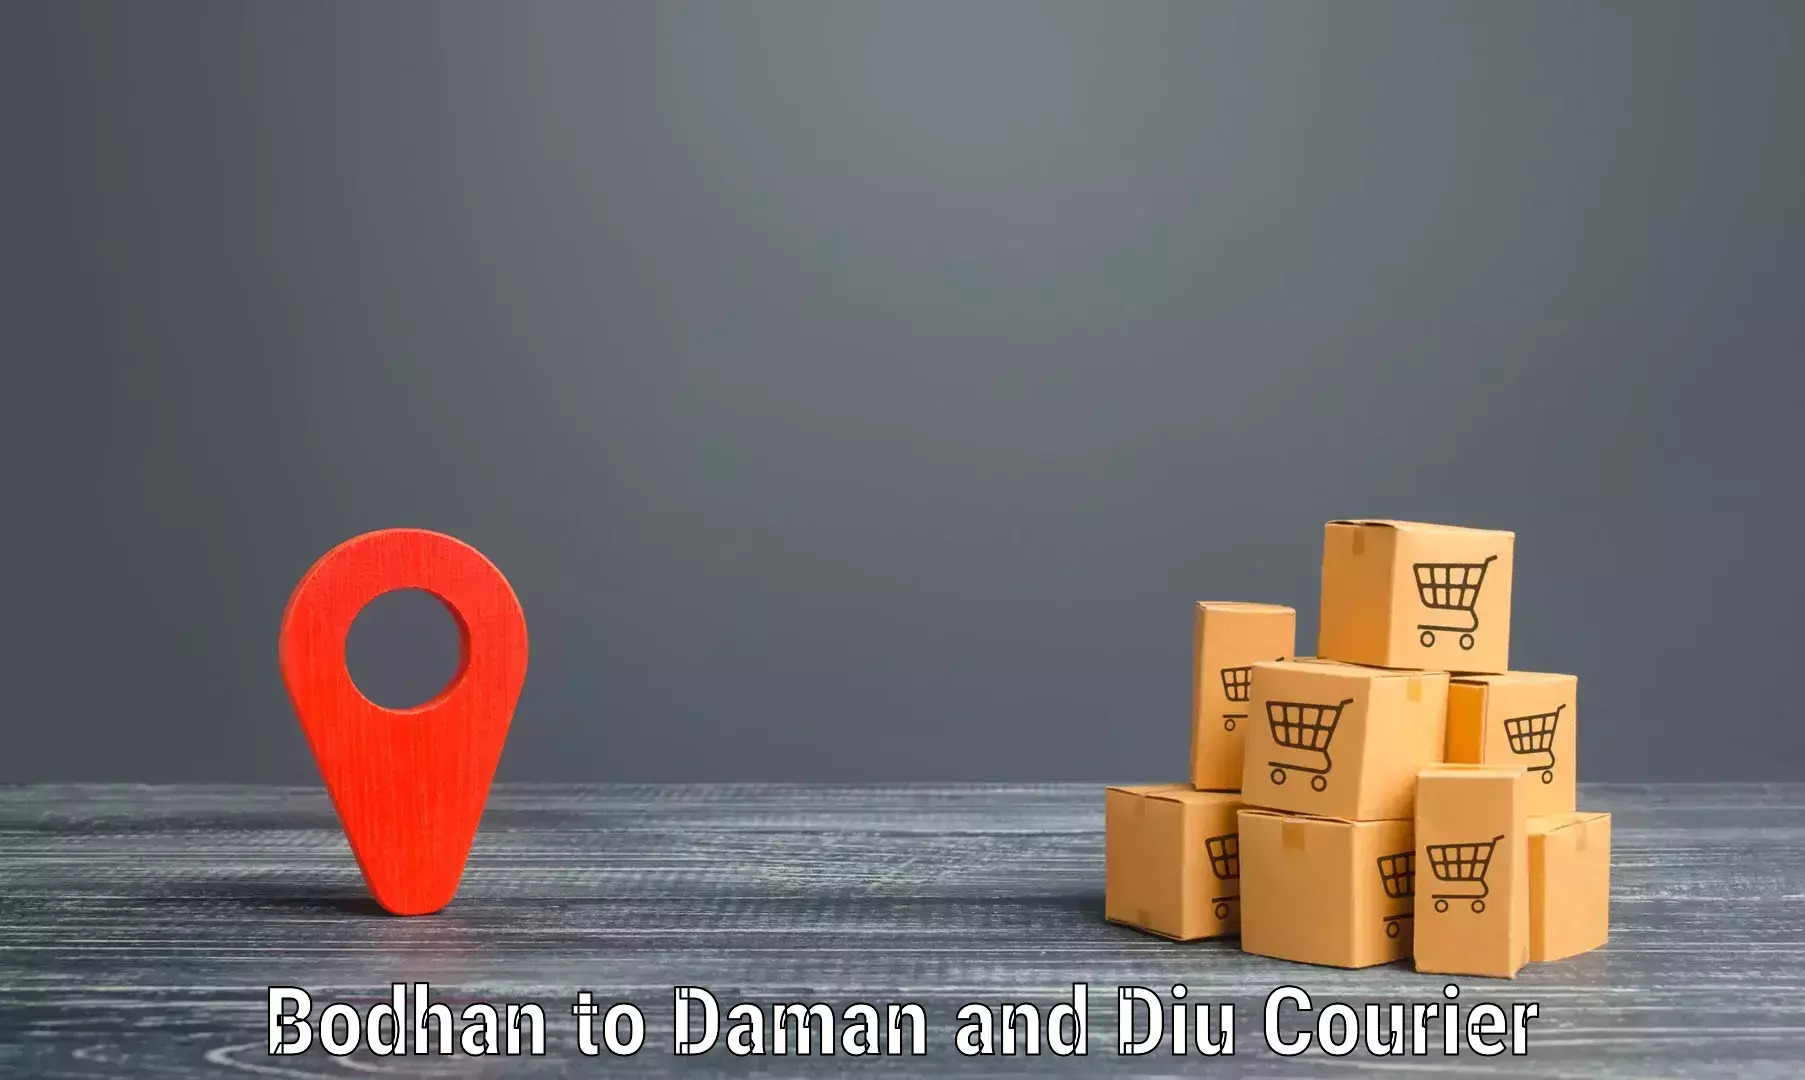 Efficient cargo services Bodhan to Diu